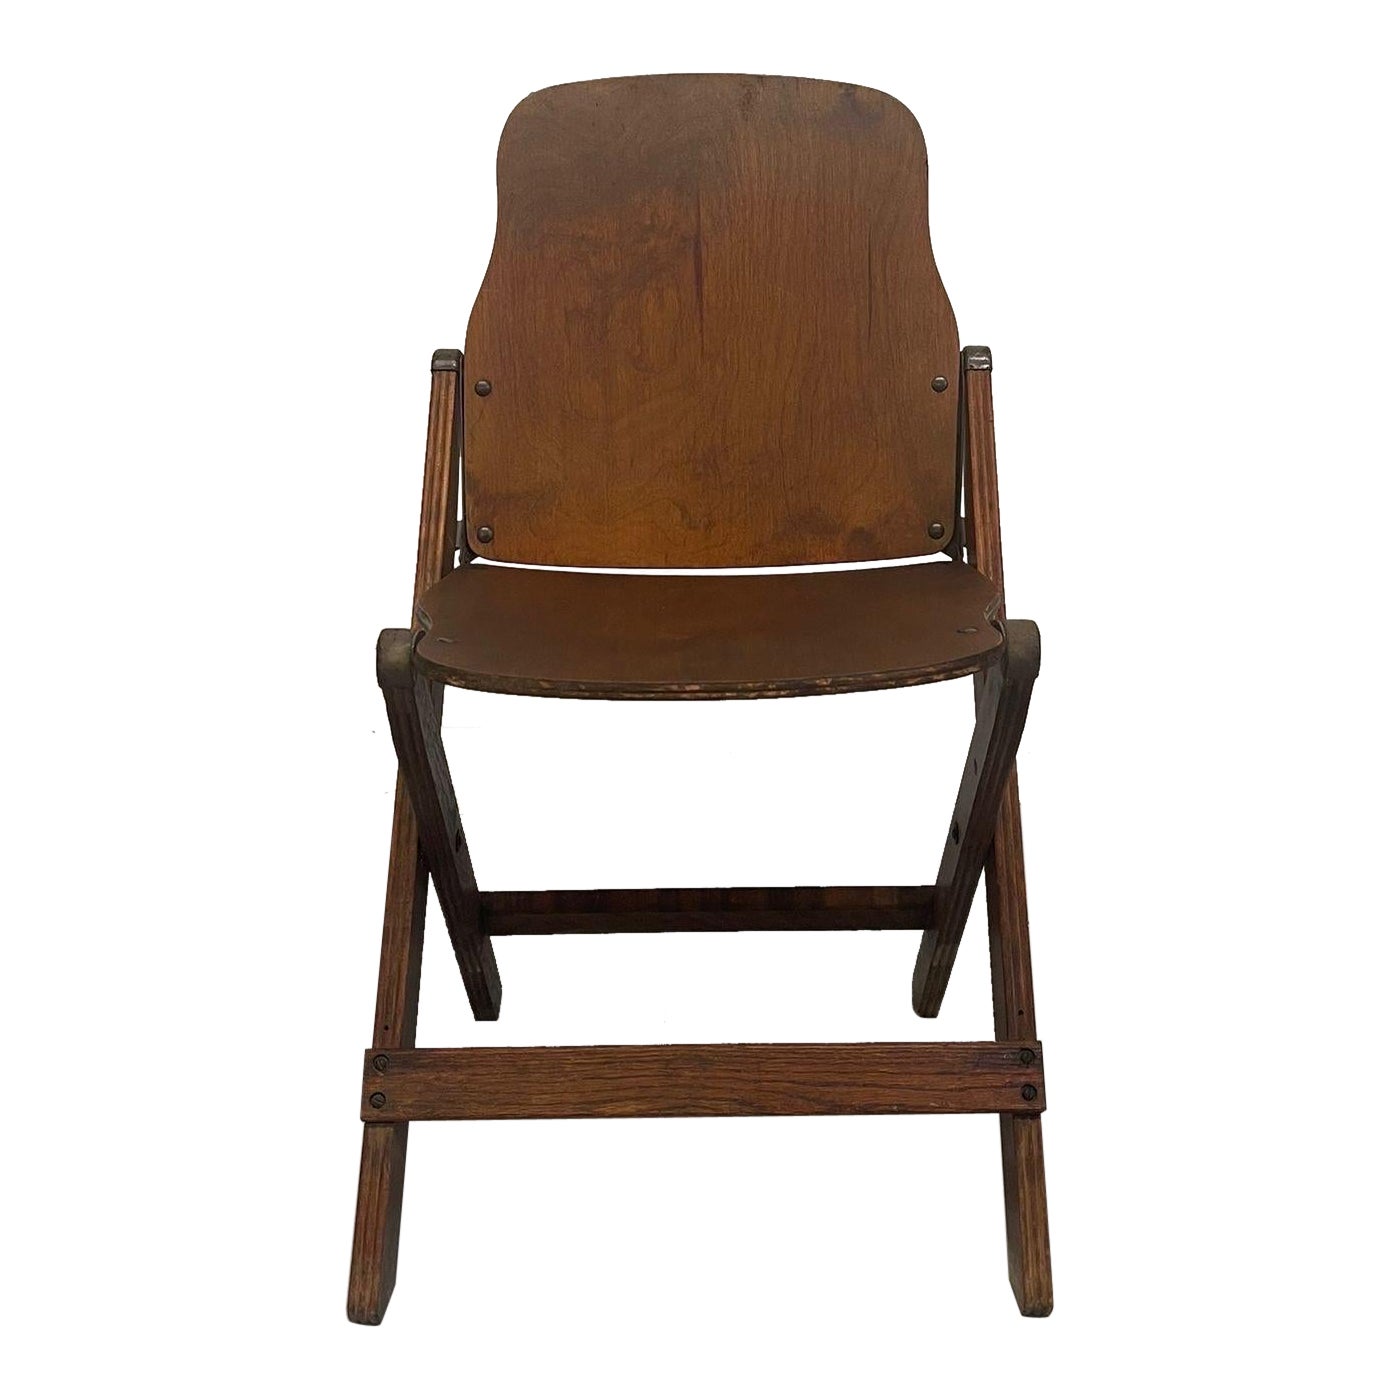 Vintage American Seating Company Folding Chair For Sale